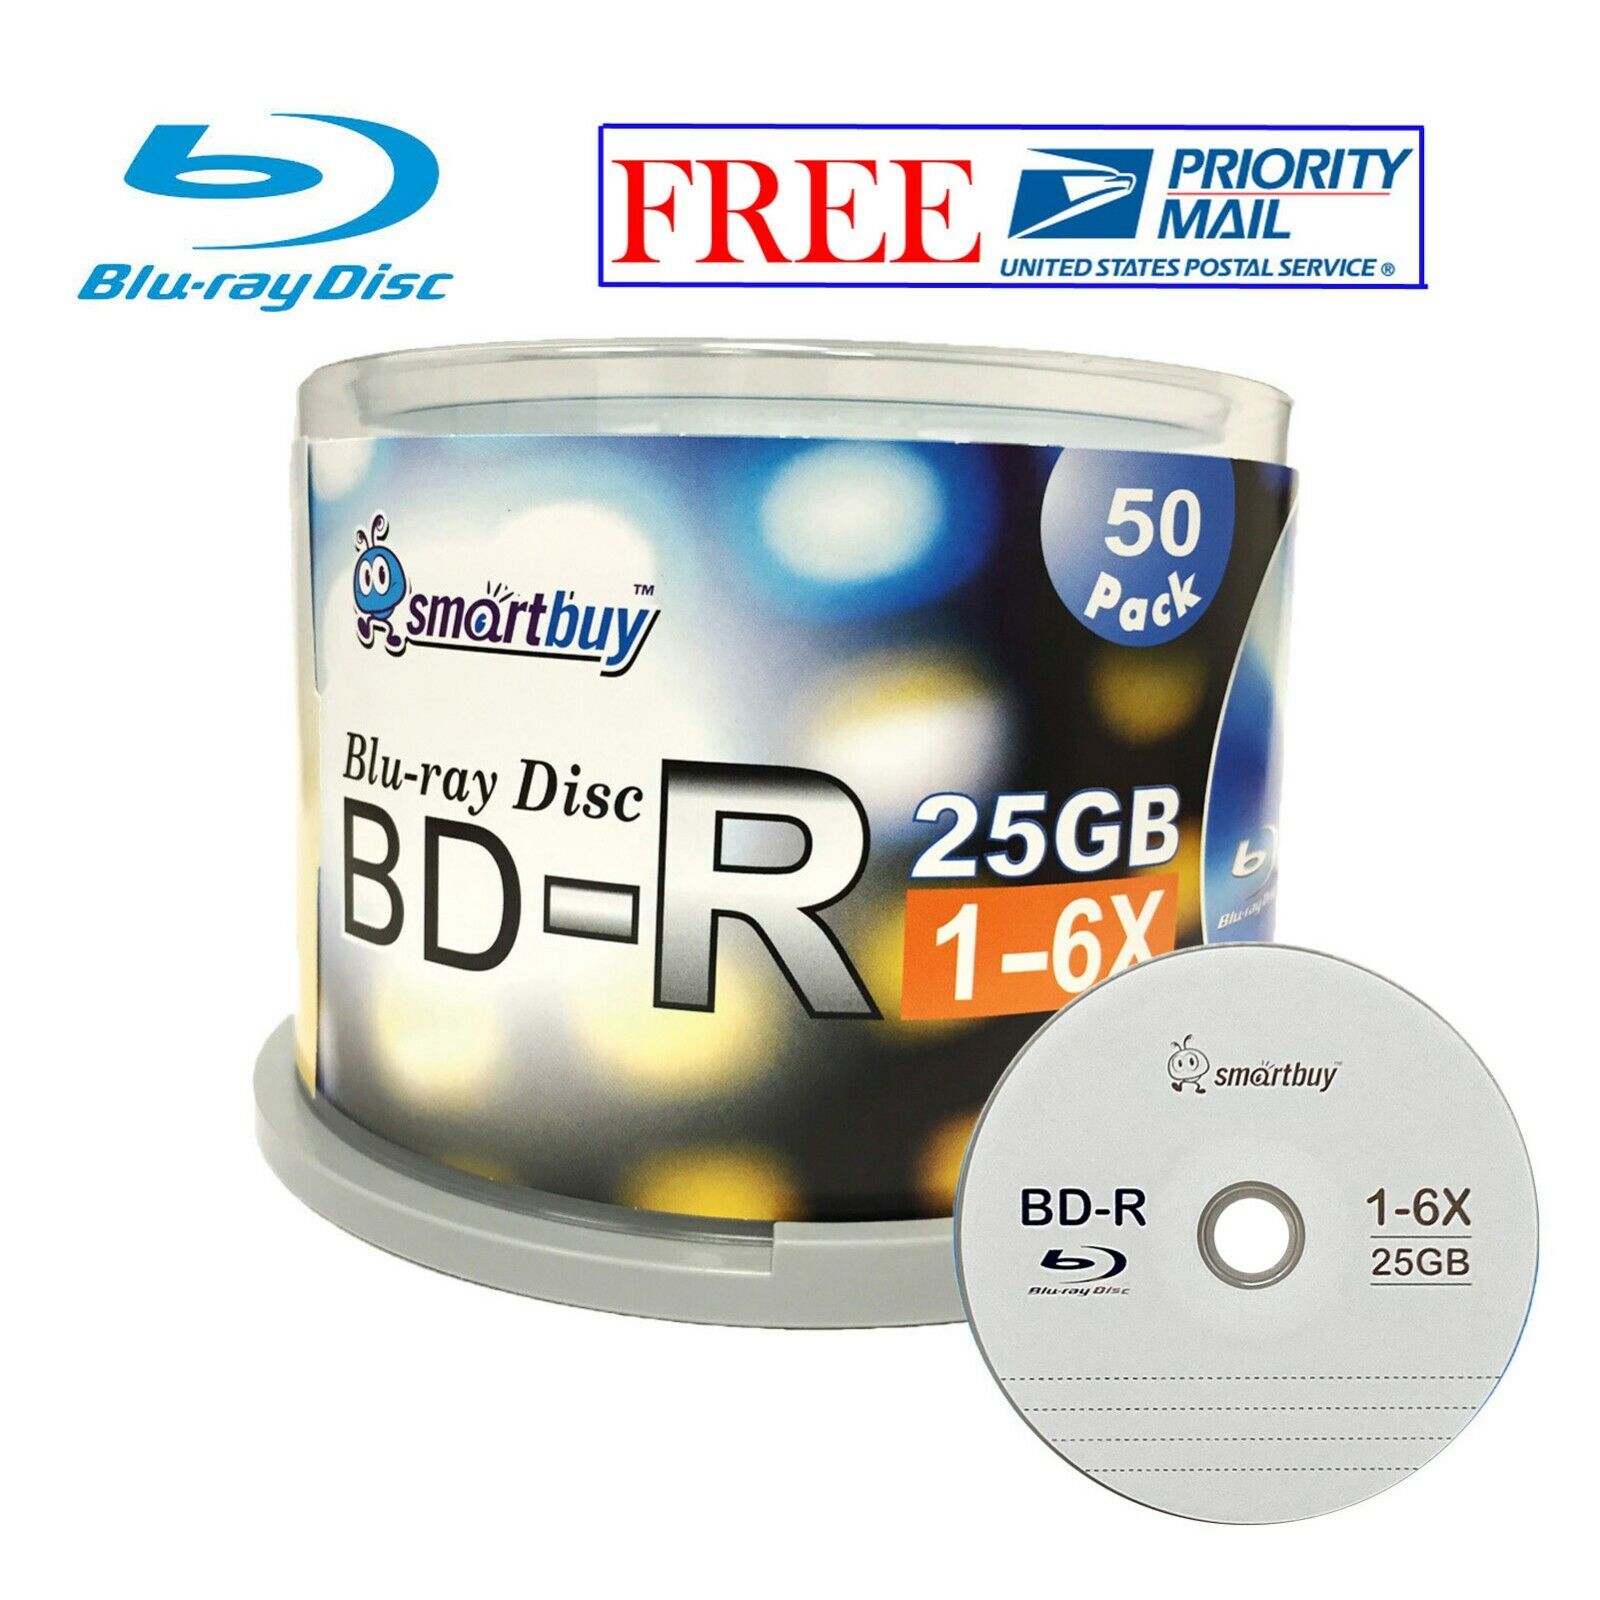 50 Pack SmartBuy Logo Top Surface BD-R BDR 6X 25GB Blue Blu-ray Recordable Disc